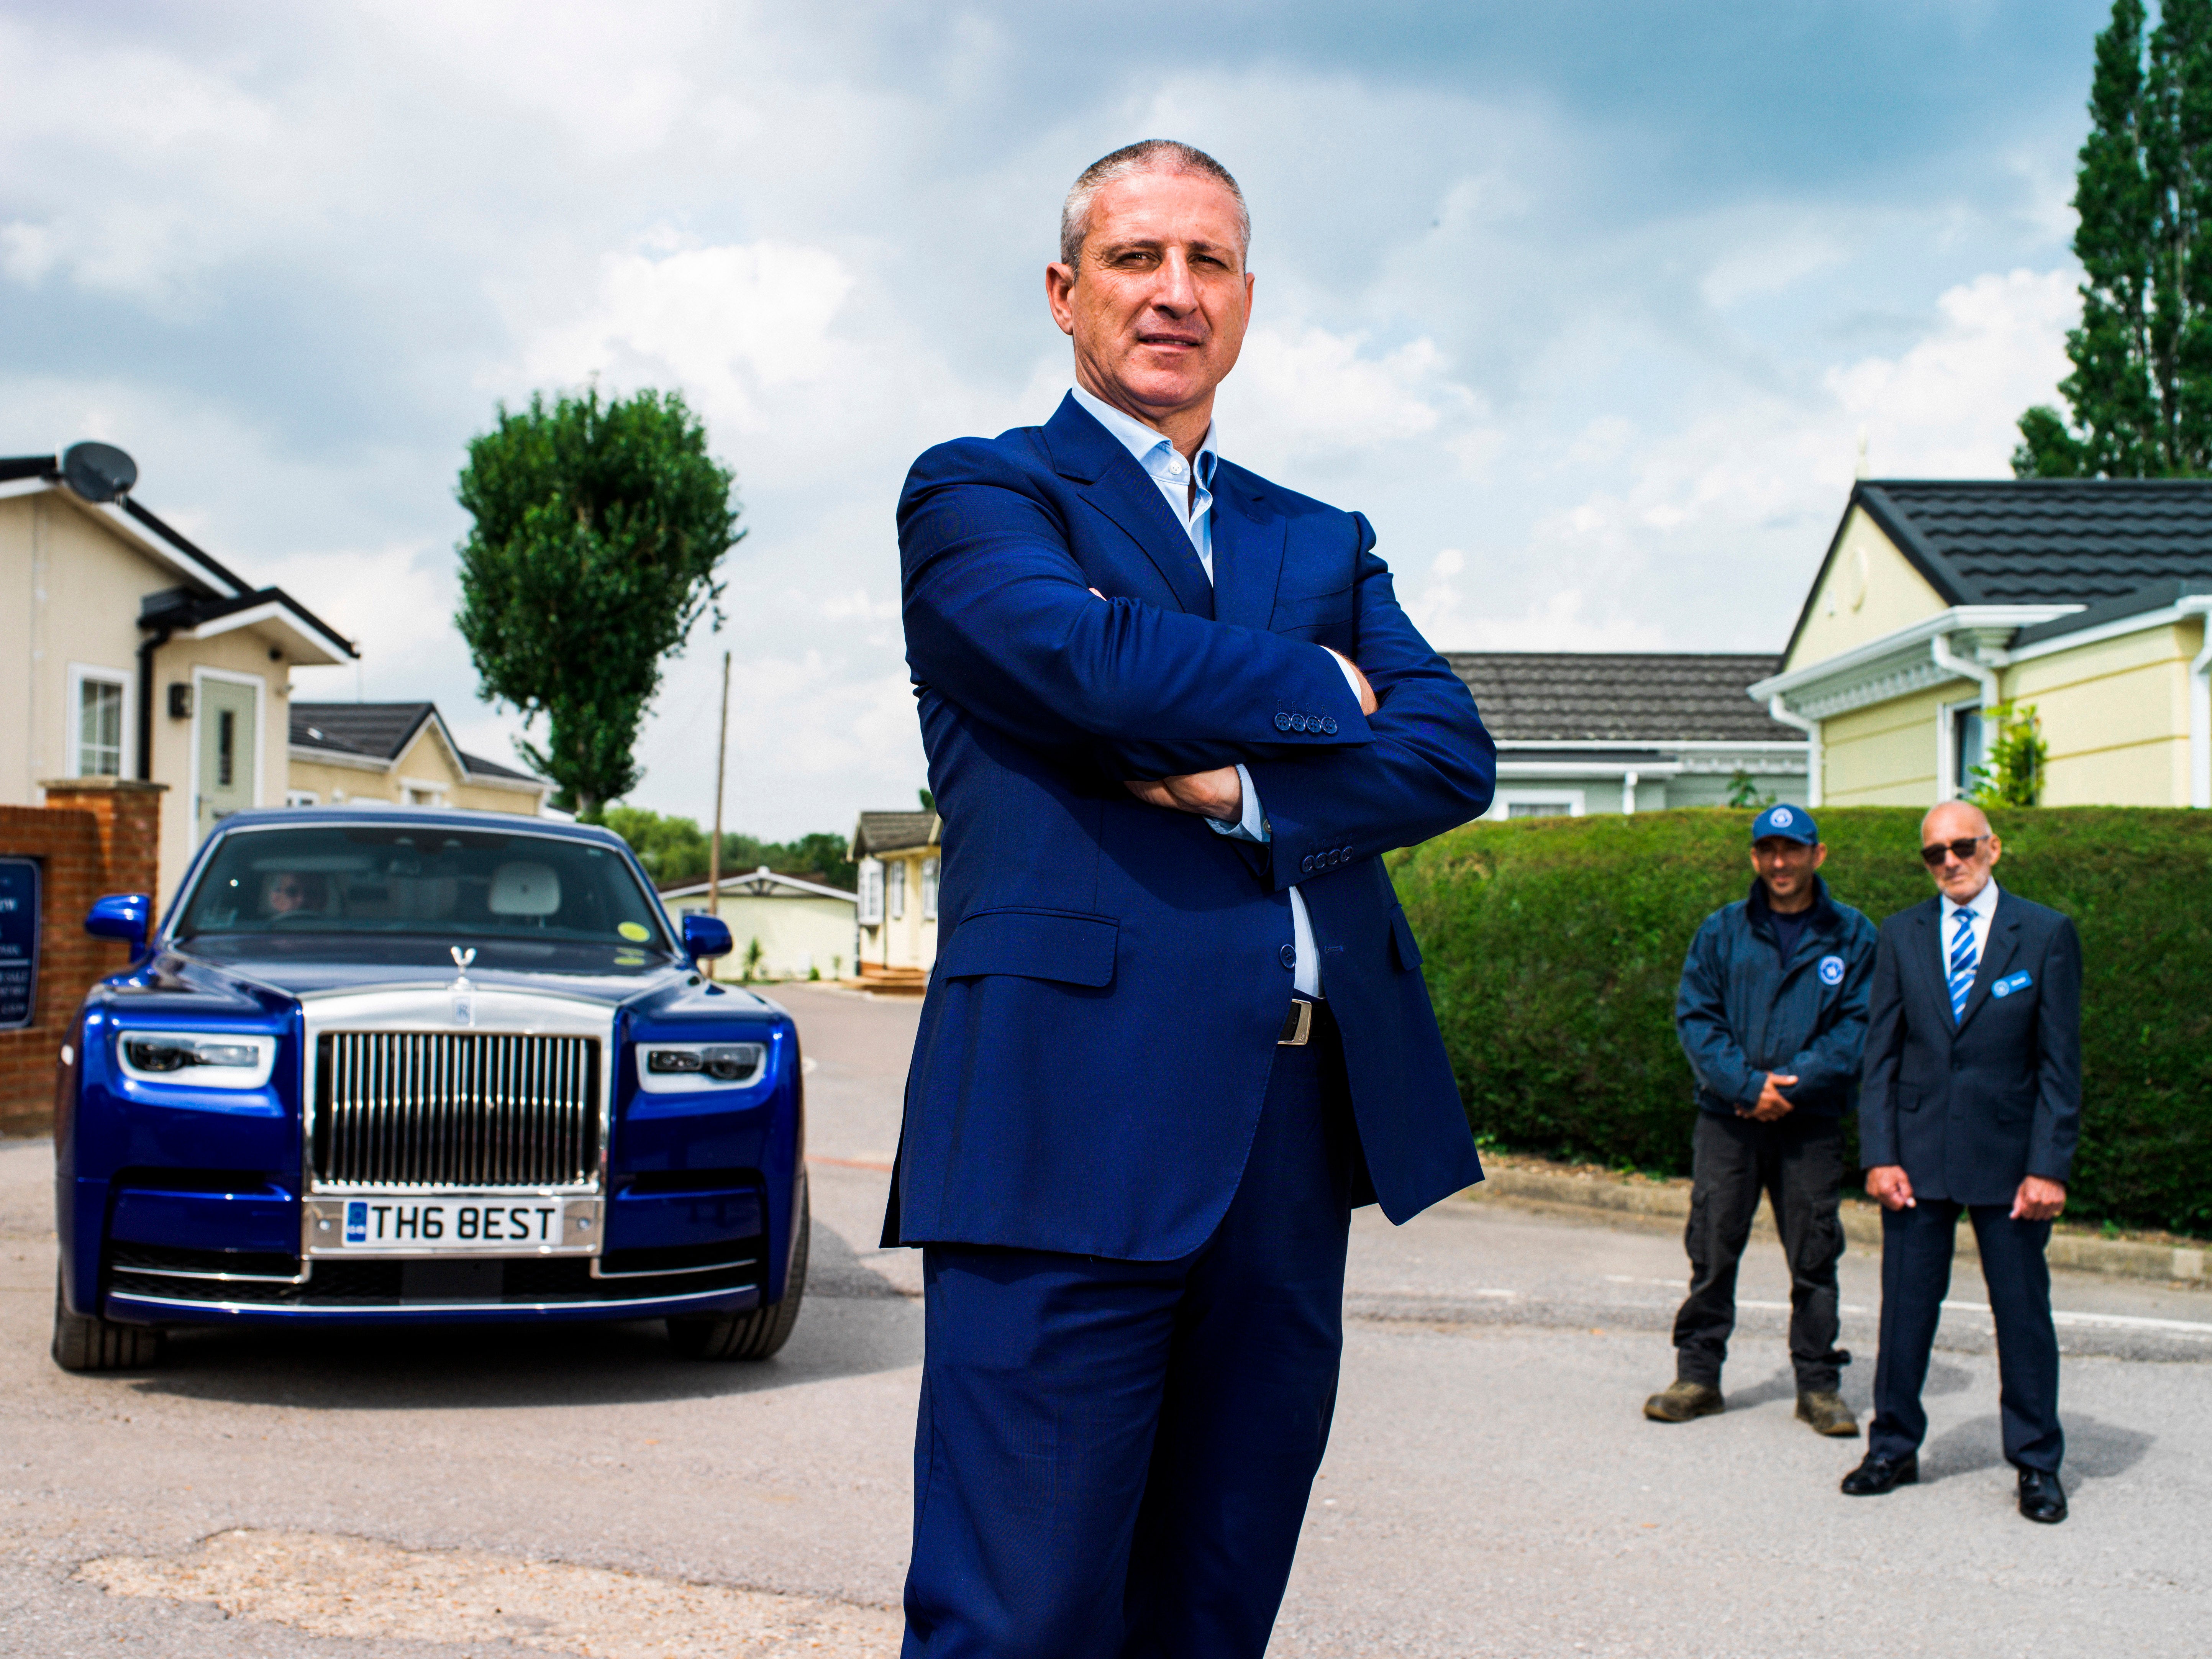 Self-made millionaire Alfie Best at Wyldecrest Parks in Essex with his Rolls-Royce and park workers